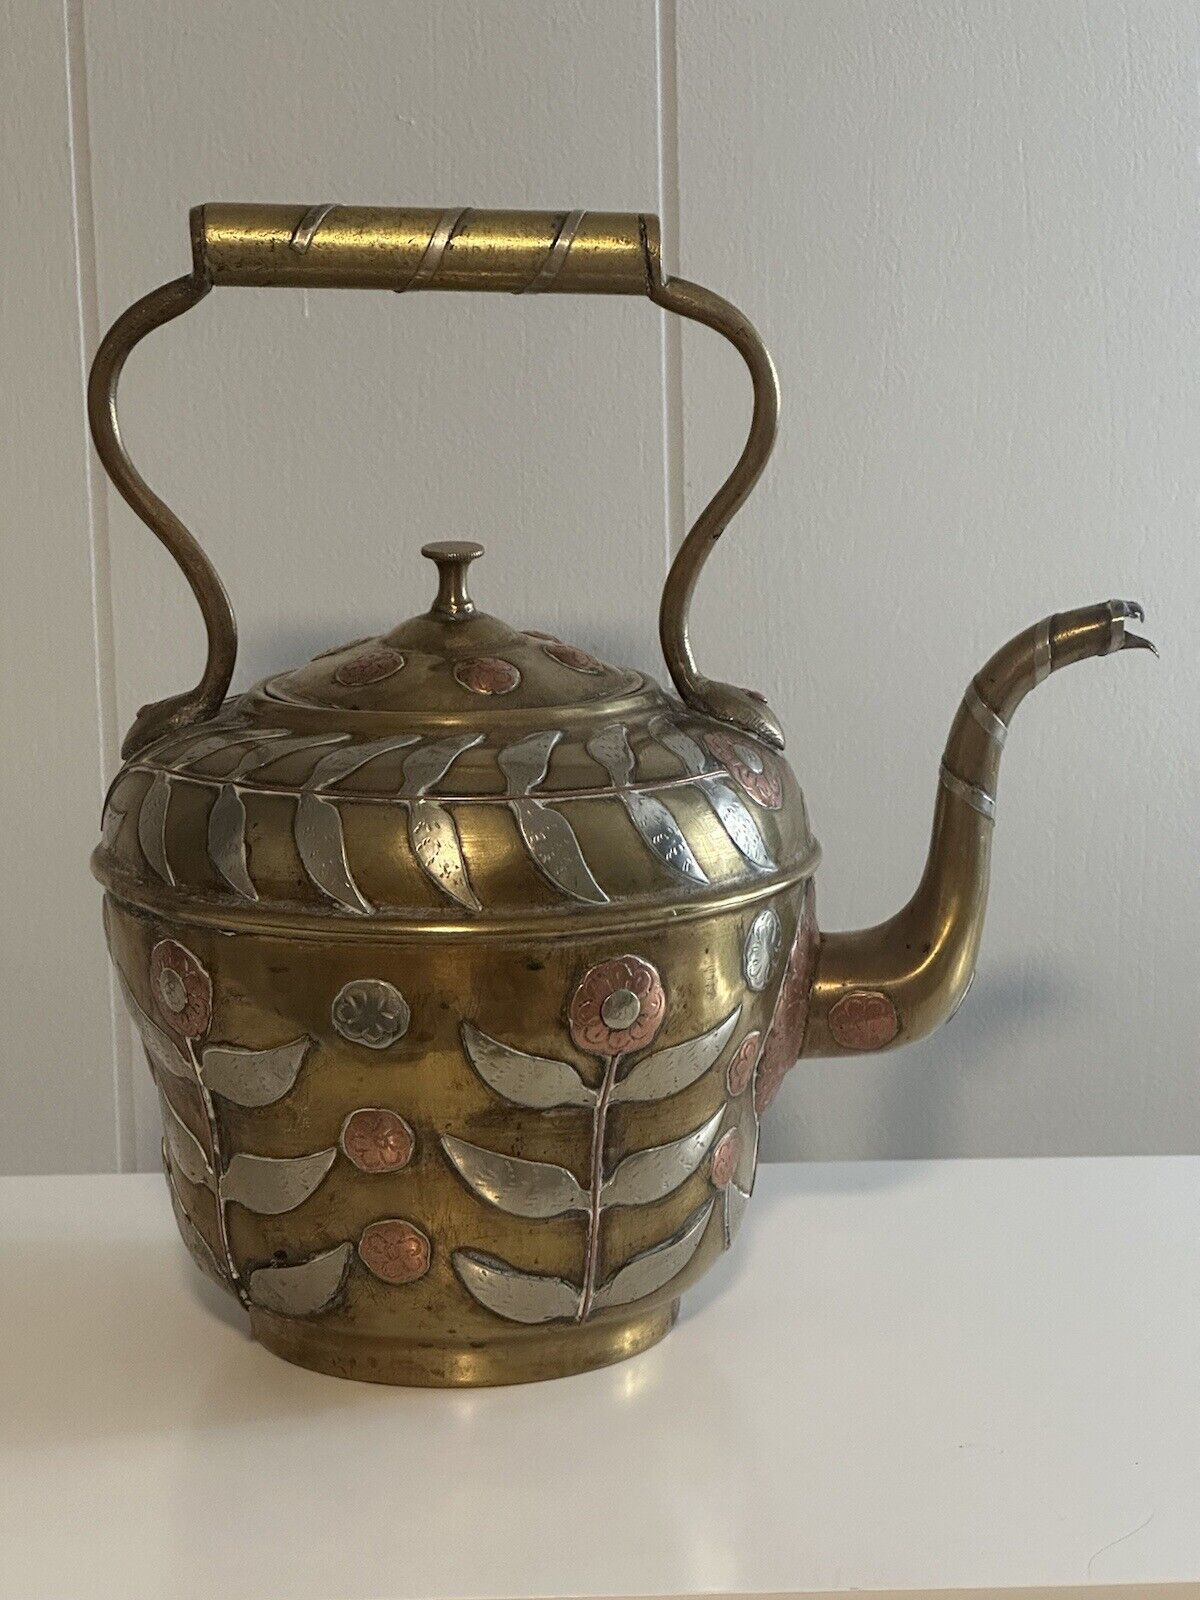 Mixed Metal Water Kettle, Sunflower Motif Early 20th Century